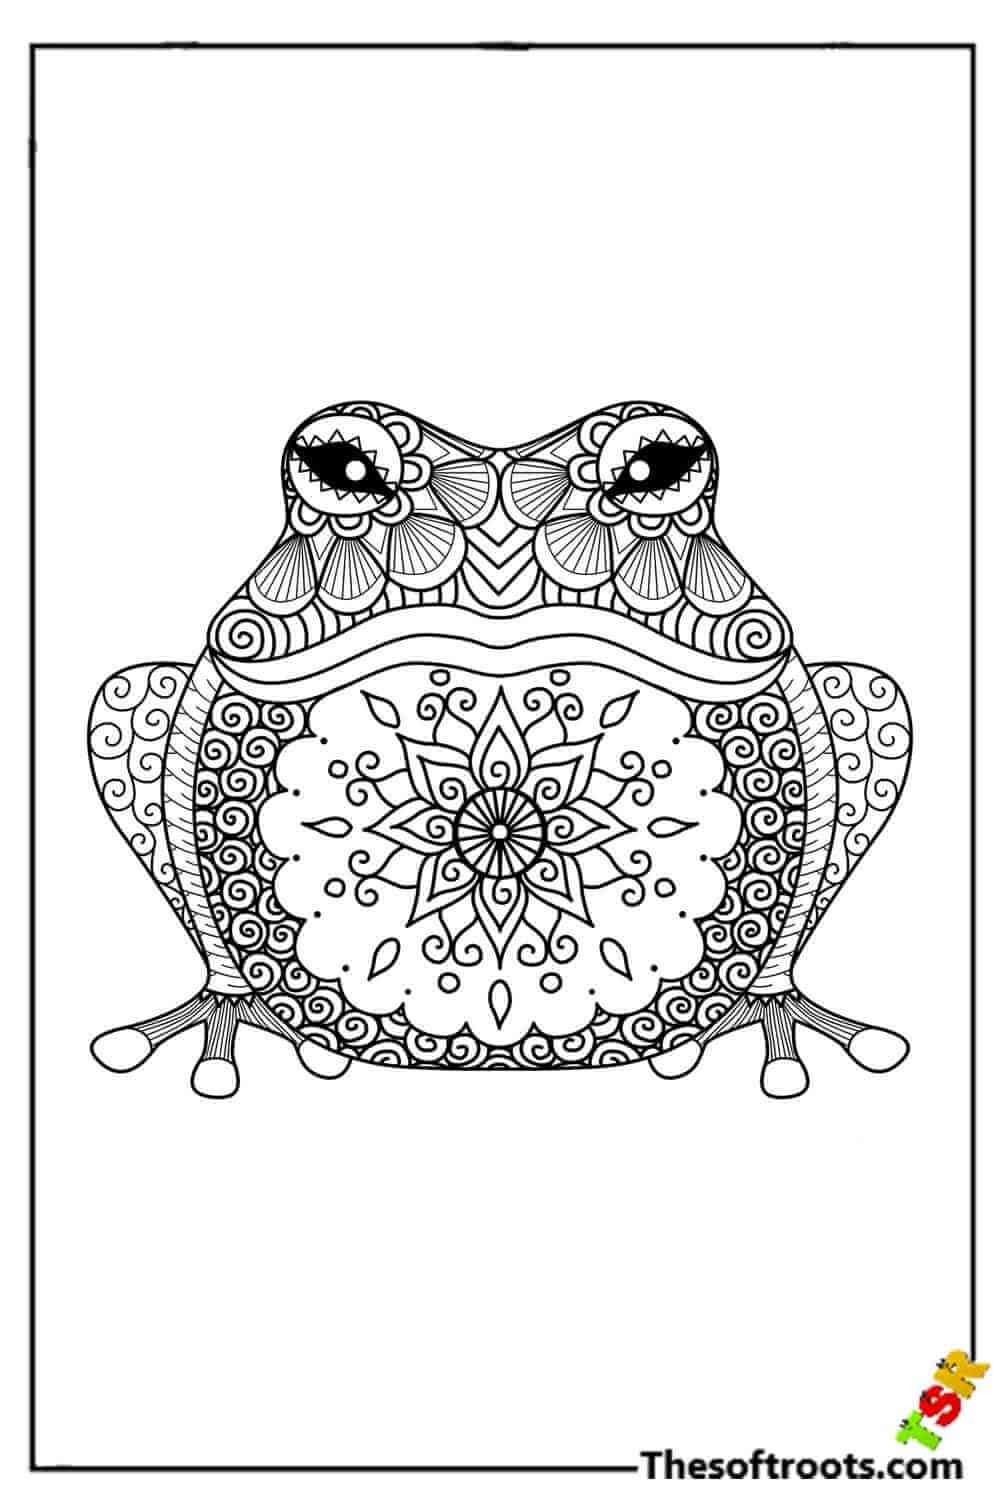 Adult Frog coloring pages